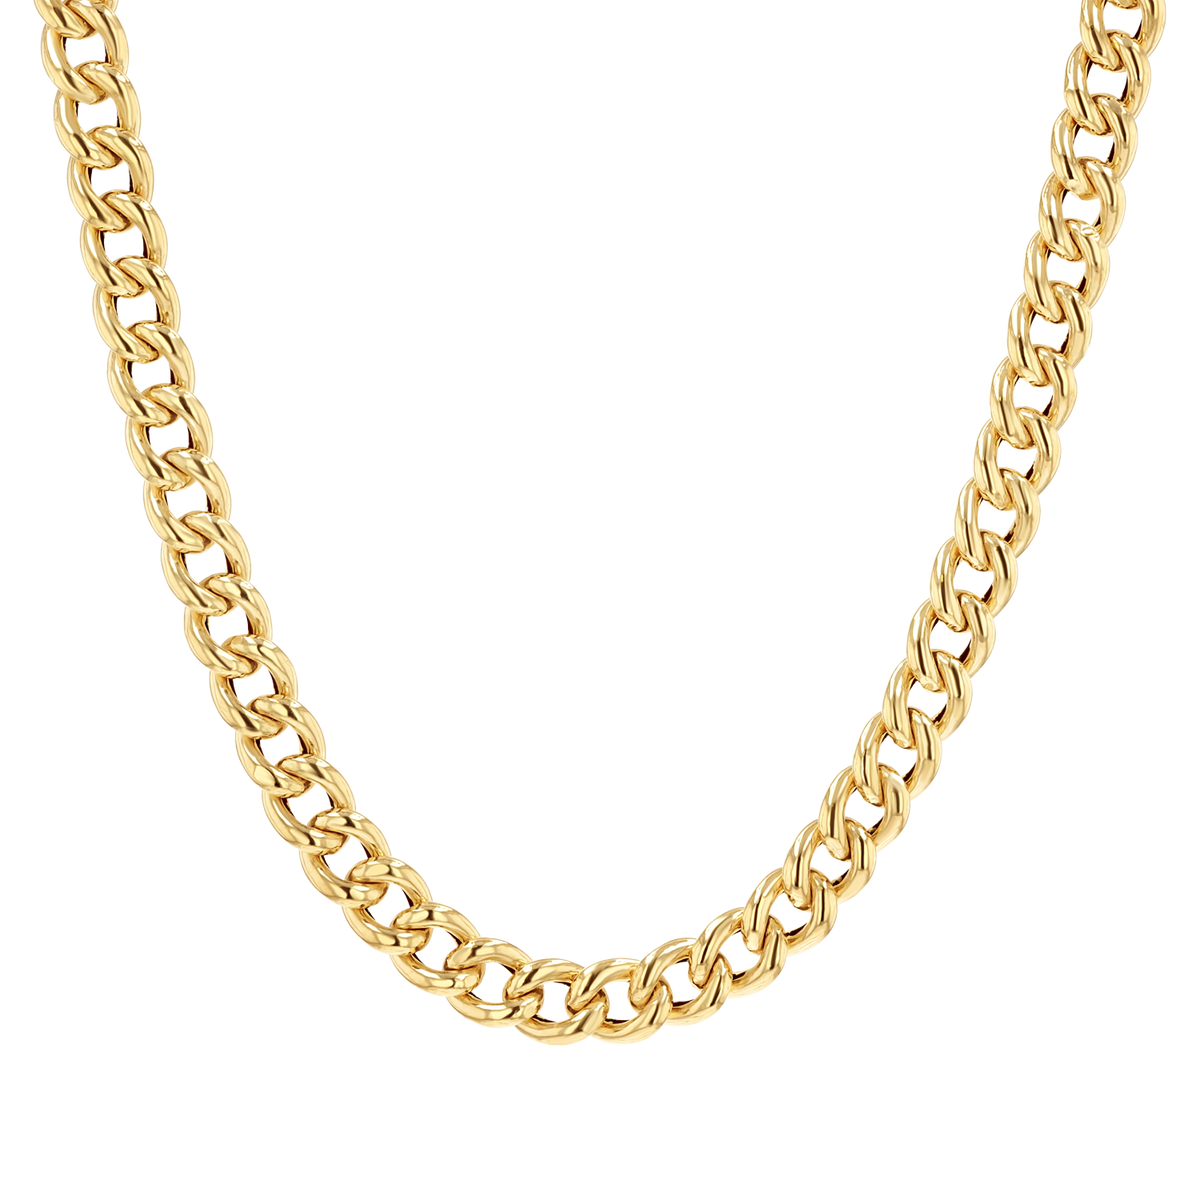 Cuban Link Drop Chain Diamond Earring 14K Yellow Gold / Pair by Baby Gold - Shop Custom Gold Jewelry